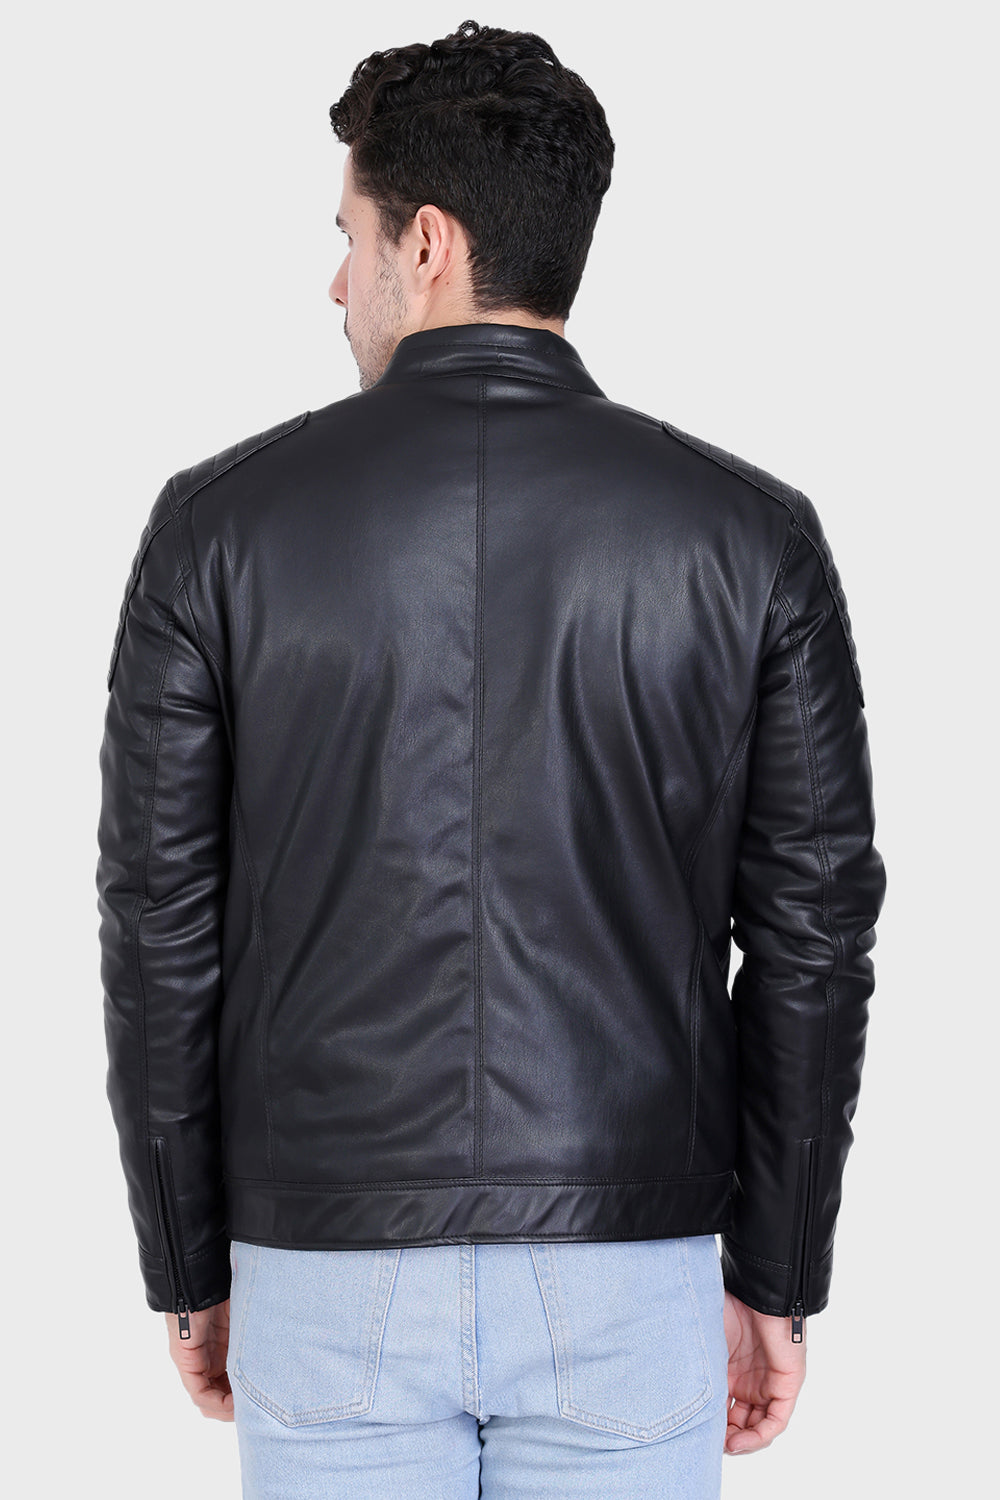 Justanned Rich Charcoal Leather Jacket